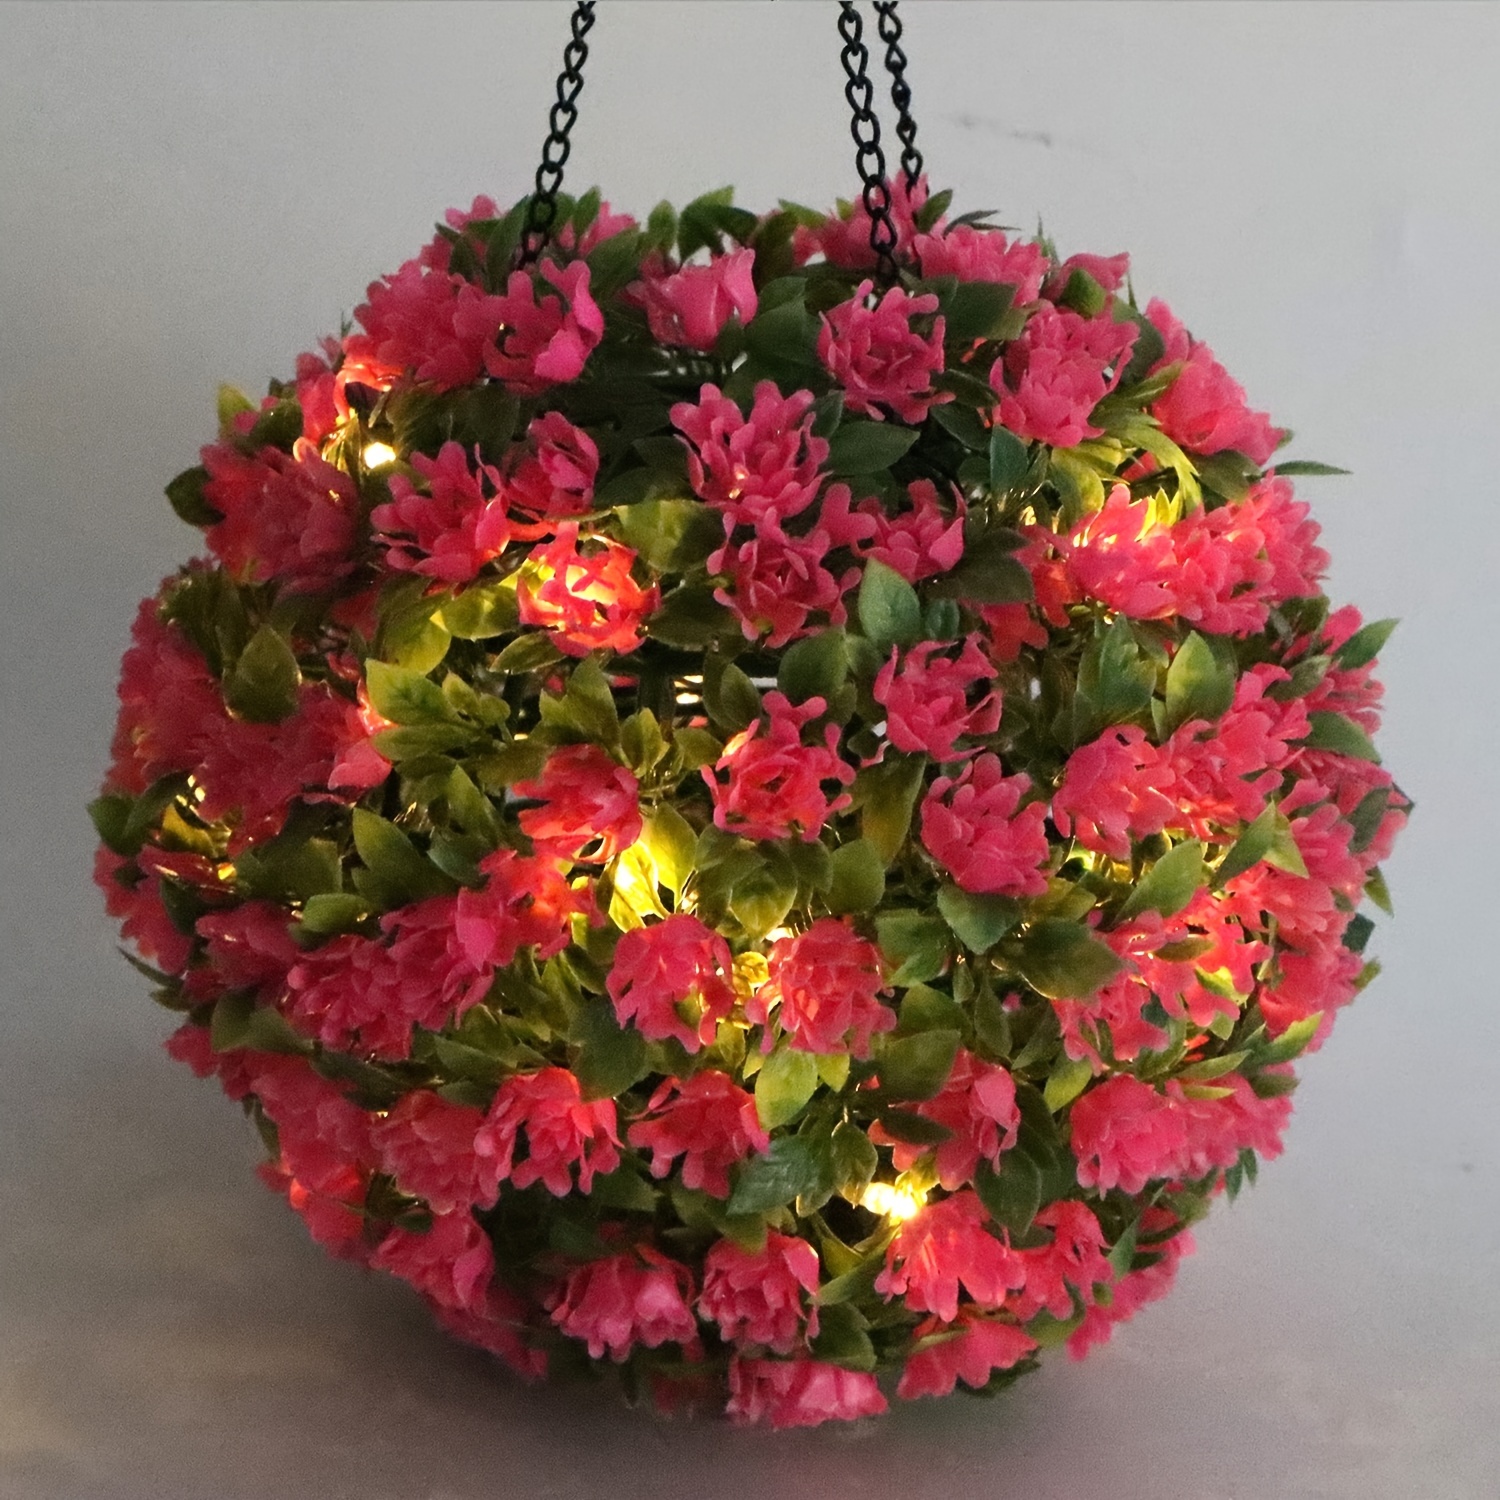 Solar Flower Ball Lights: Add A Touch Of Elegance To Your Garden